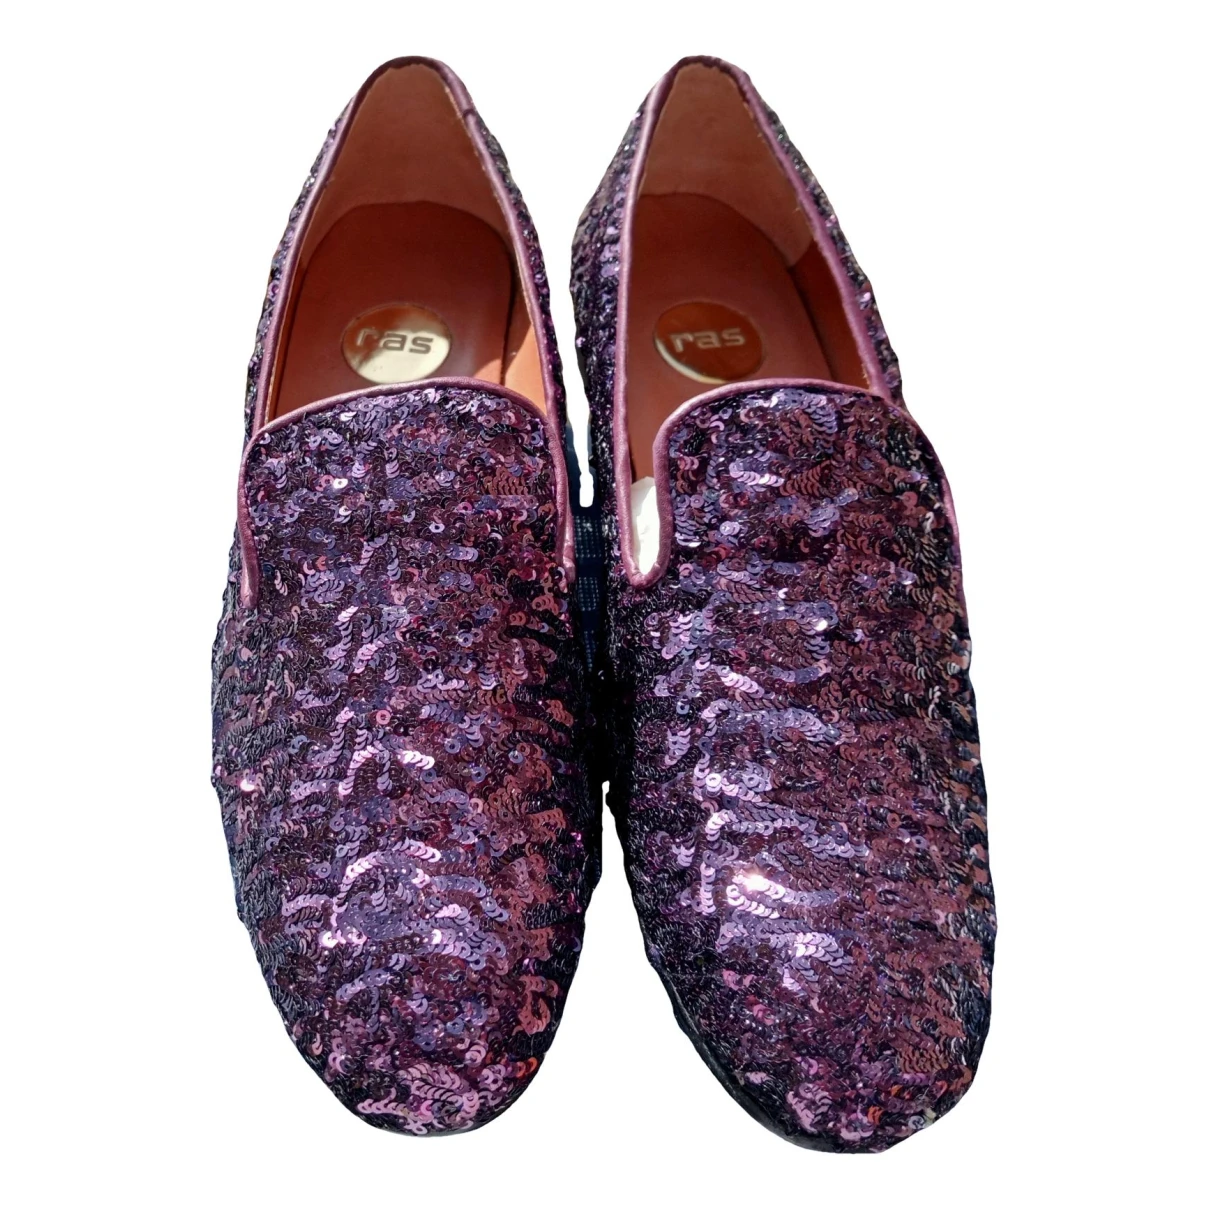 Pre-owned Ras Leather Flats In Burgundy